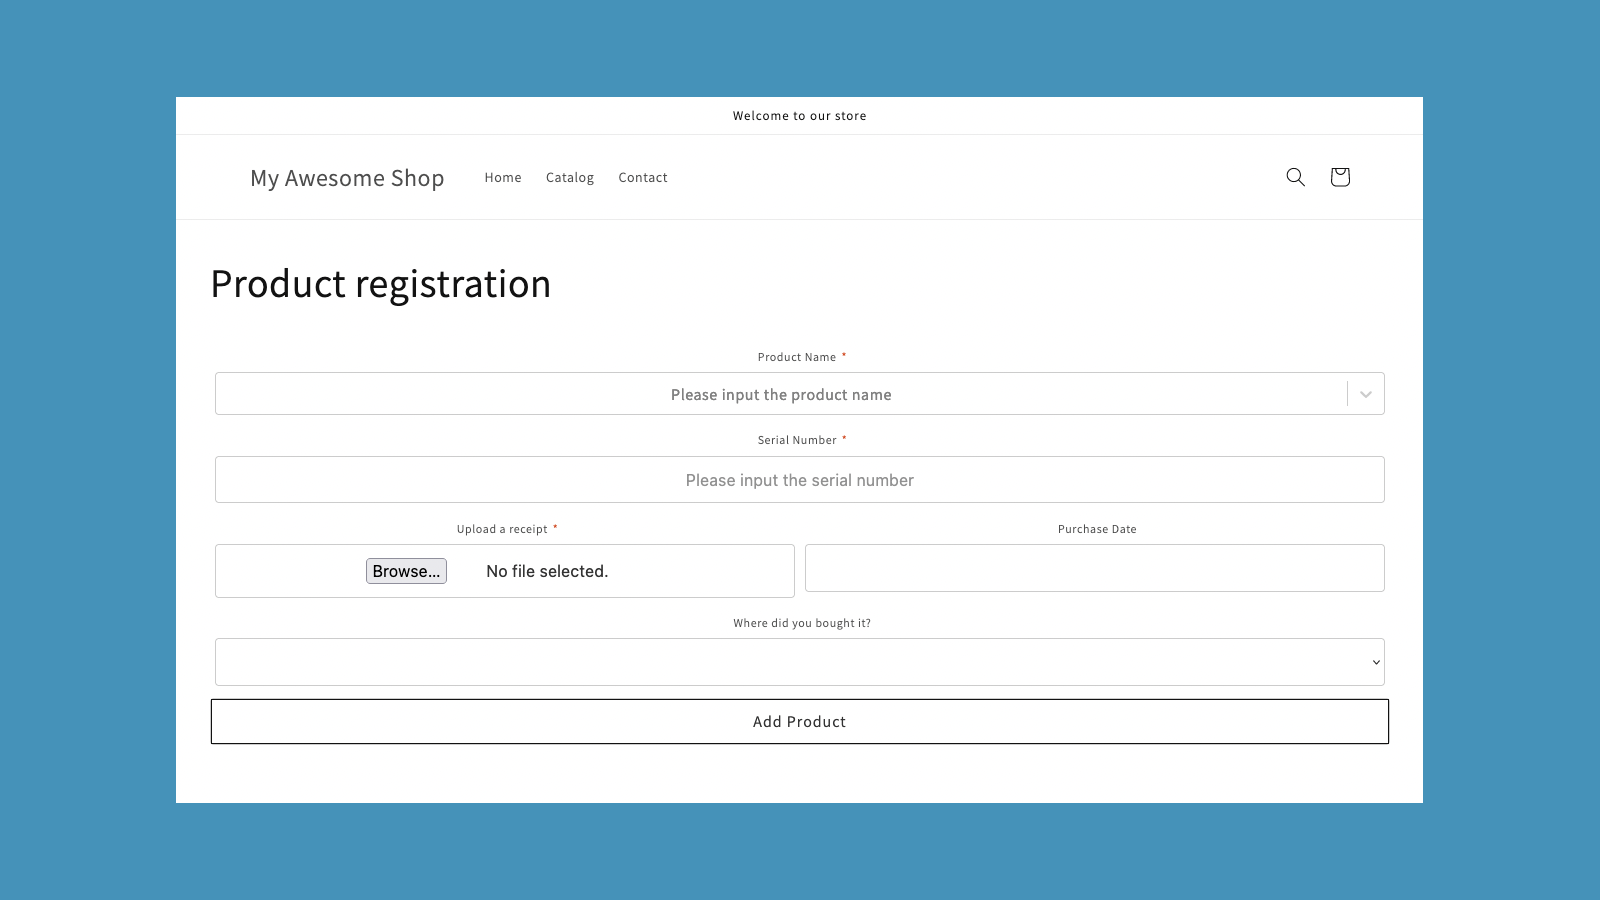 Stage 1. Register product with dropdown and upload image etc